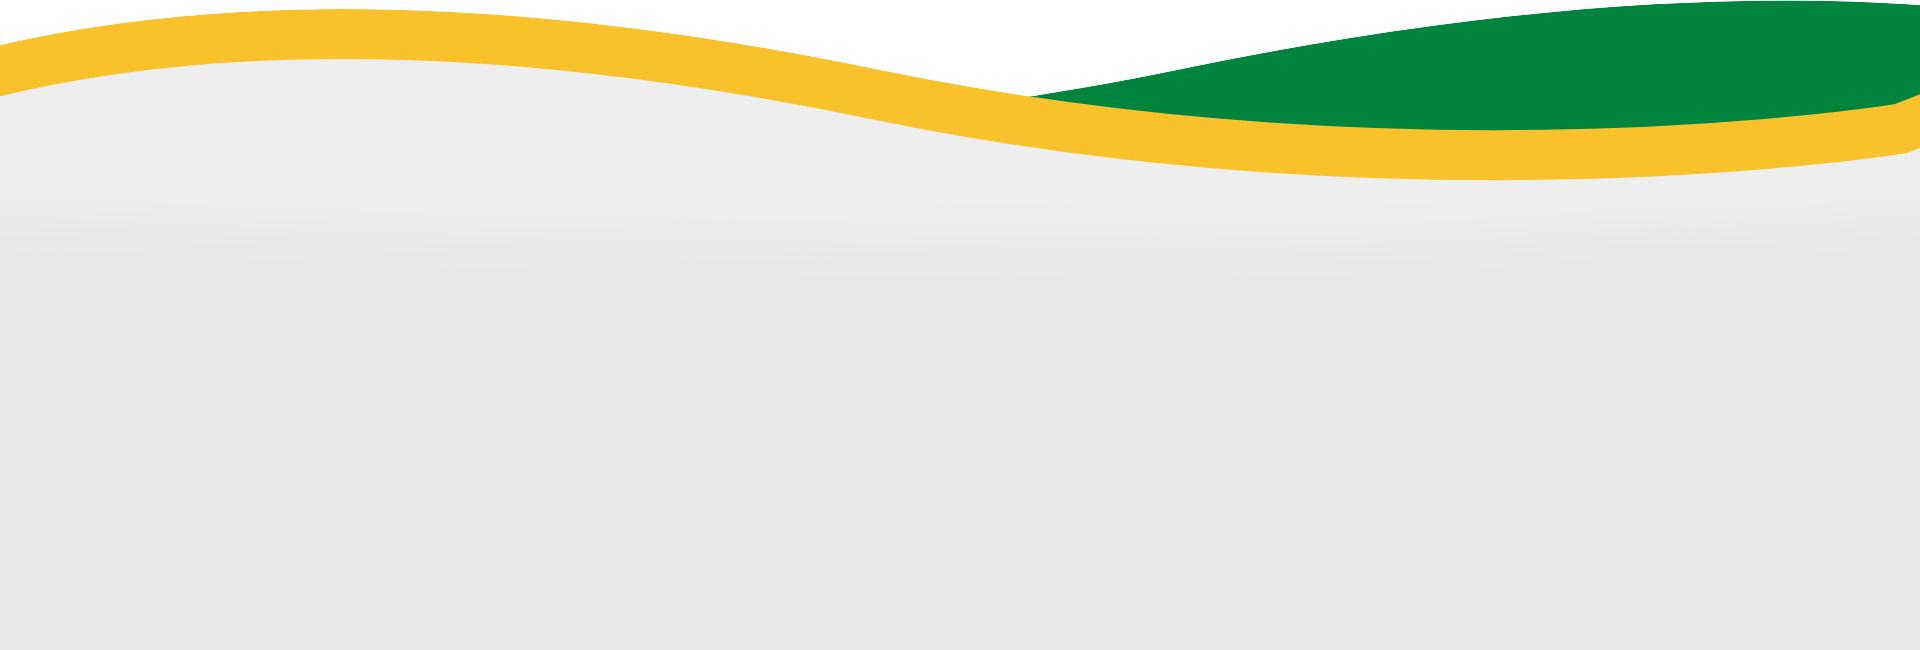 background image with yellow and green lines